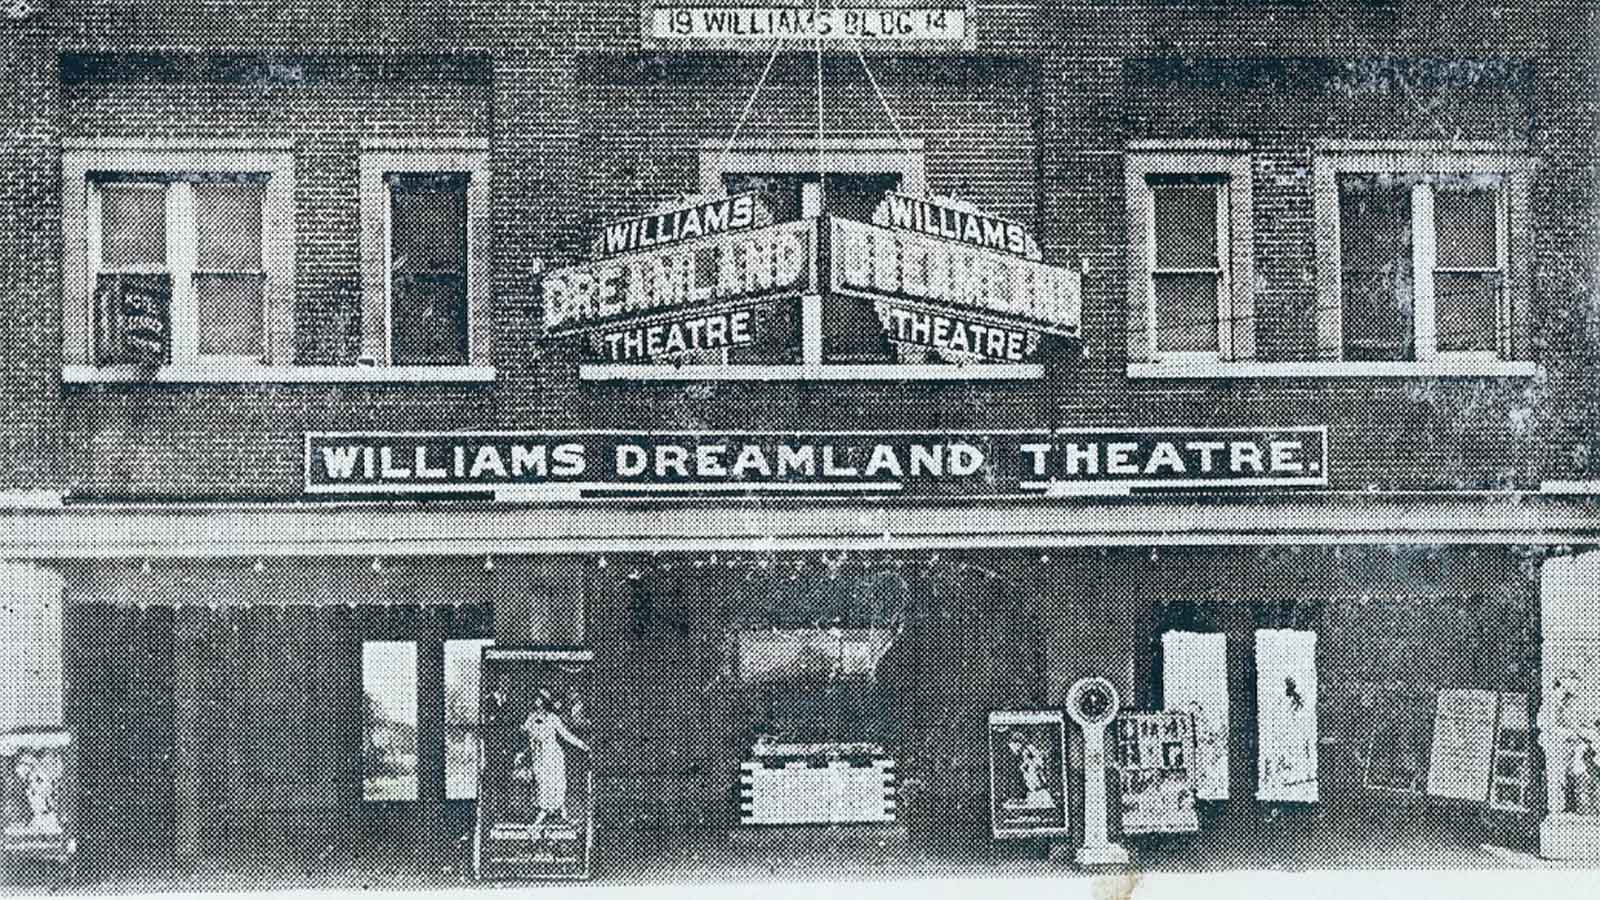 An exterior view of Williams Dreamland Theatre in Tulsa, which was destroyed during the massacre in 1921. 